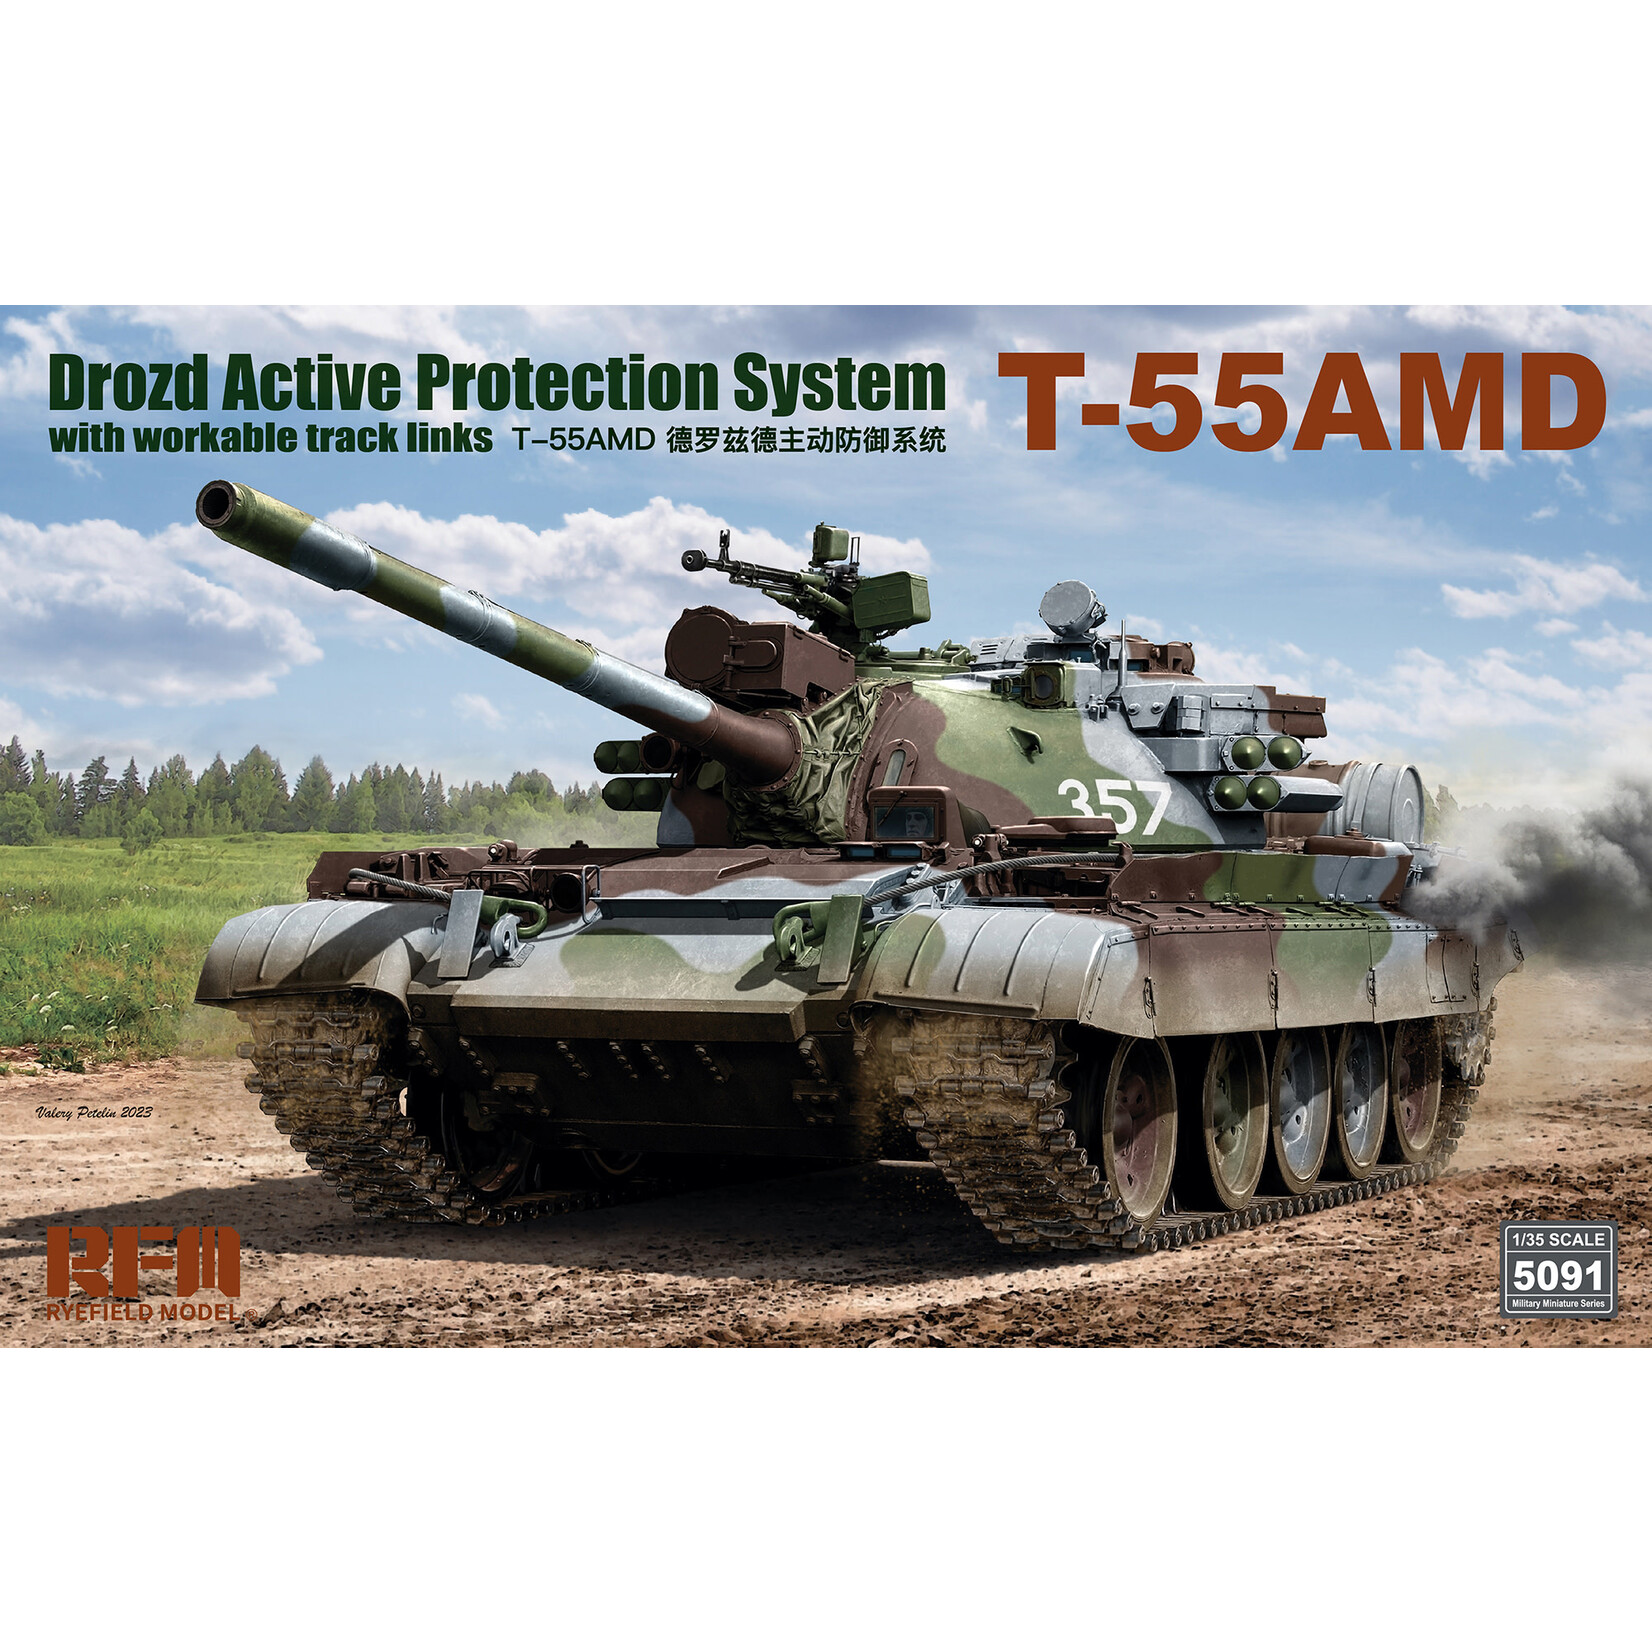 Rye Field Model RFMRM5091 T-55AMD Drozd Active Protection System (1/35)